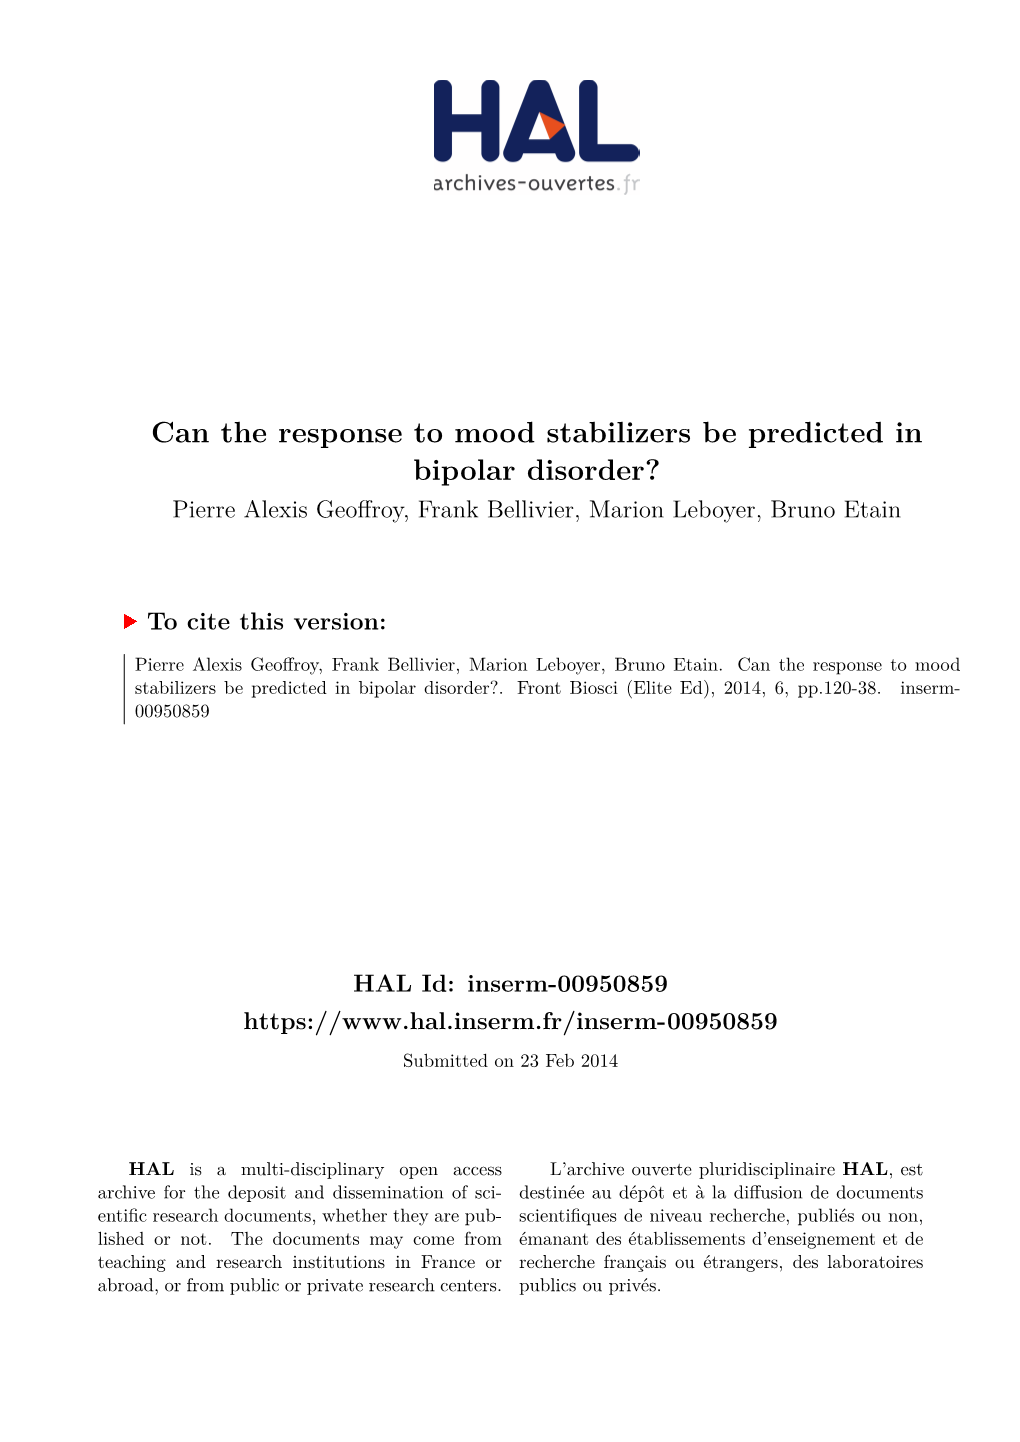 Can the Response to Mood Stabilizers Be Predicted in Bipolar Disorder? Pierre Alexis Geoffroy, Frank Bellivier, Marion Leboyer, Bruno Etain